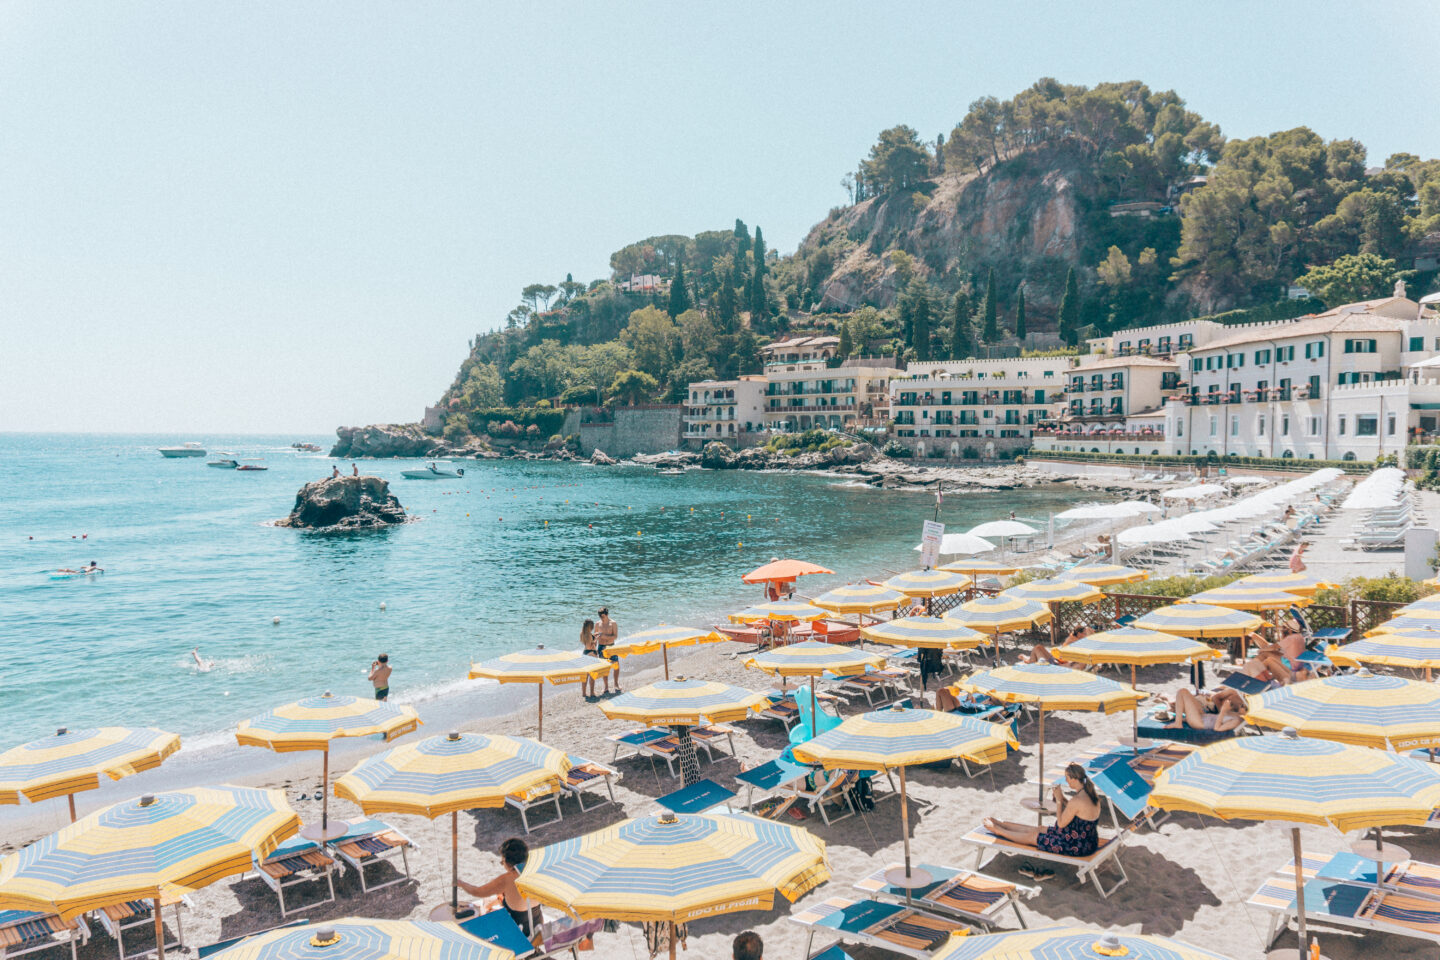 Blue and yellow umbrellas and sun chairs at the beautiful Mazzaro Bay beach in Taormina - a must stop on this 7-day Sicily Itinerary.